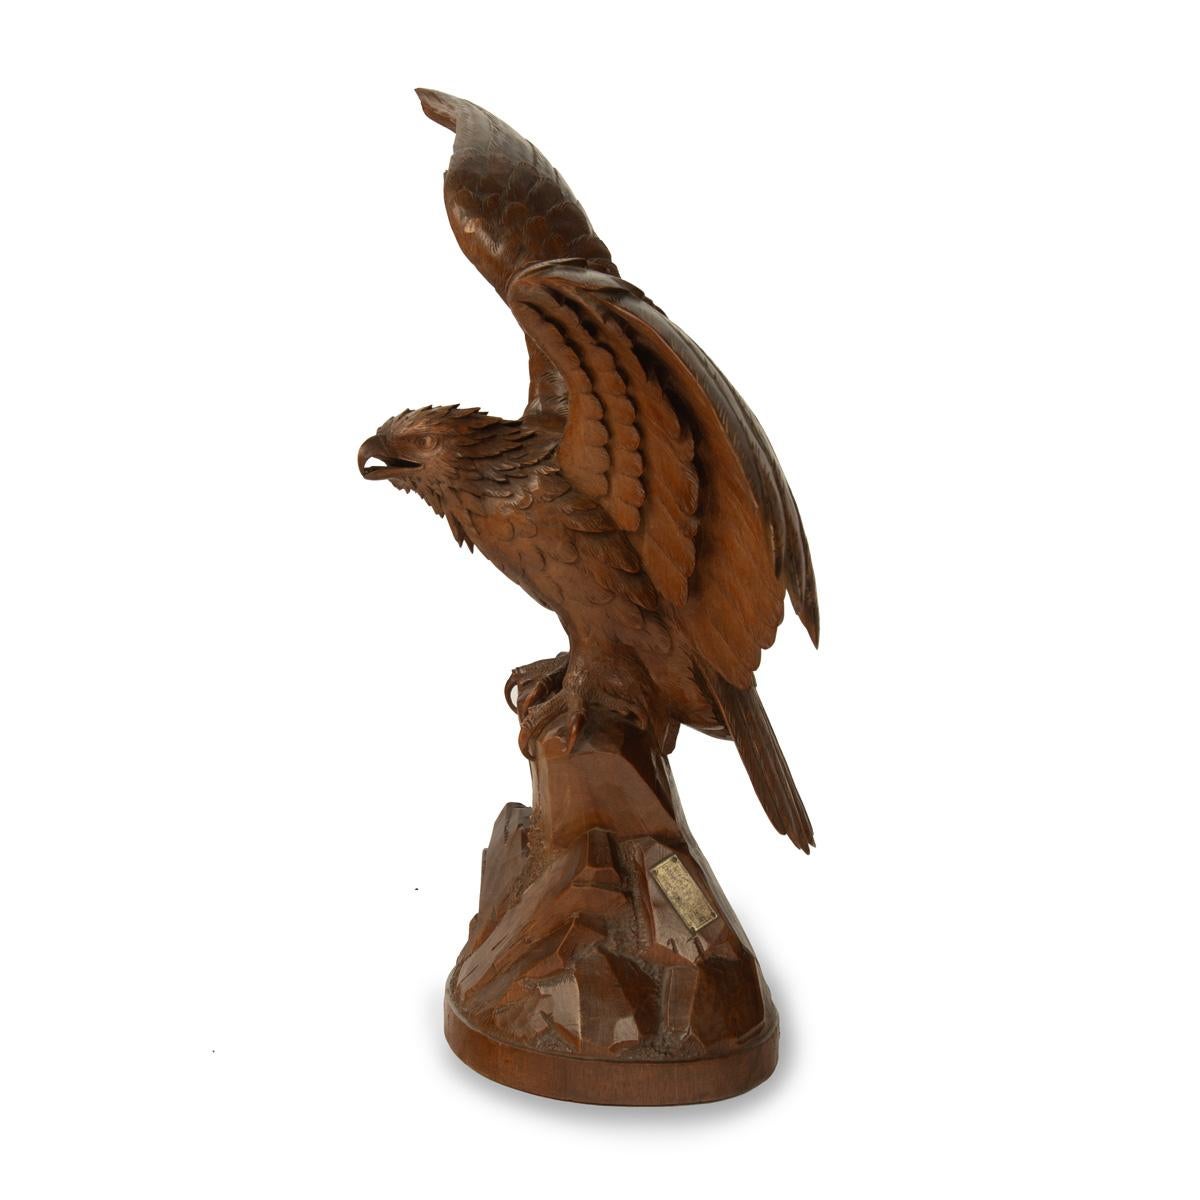 A ‘Black Forest’ linden wood eagle, naturalistically carved with wings outstretched, perched on a rocky outcrop, the base with a rubbed metal maker’s plaque most probably for Binder of Lucerne, Zermatt and St. Moritz, made in Brienz.  Swiss, circa